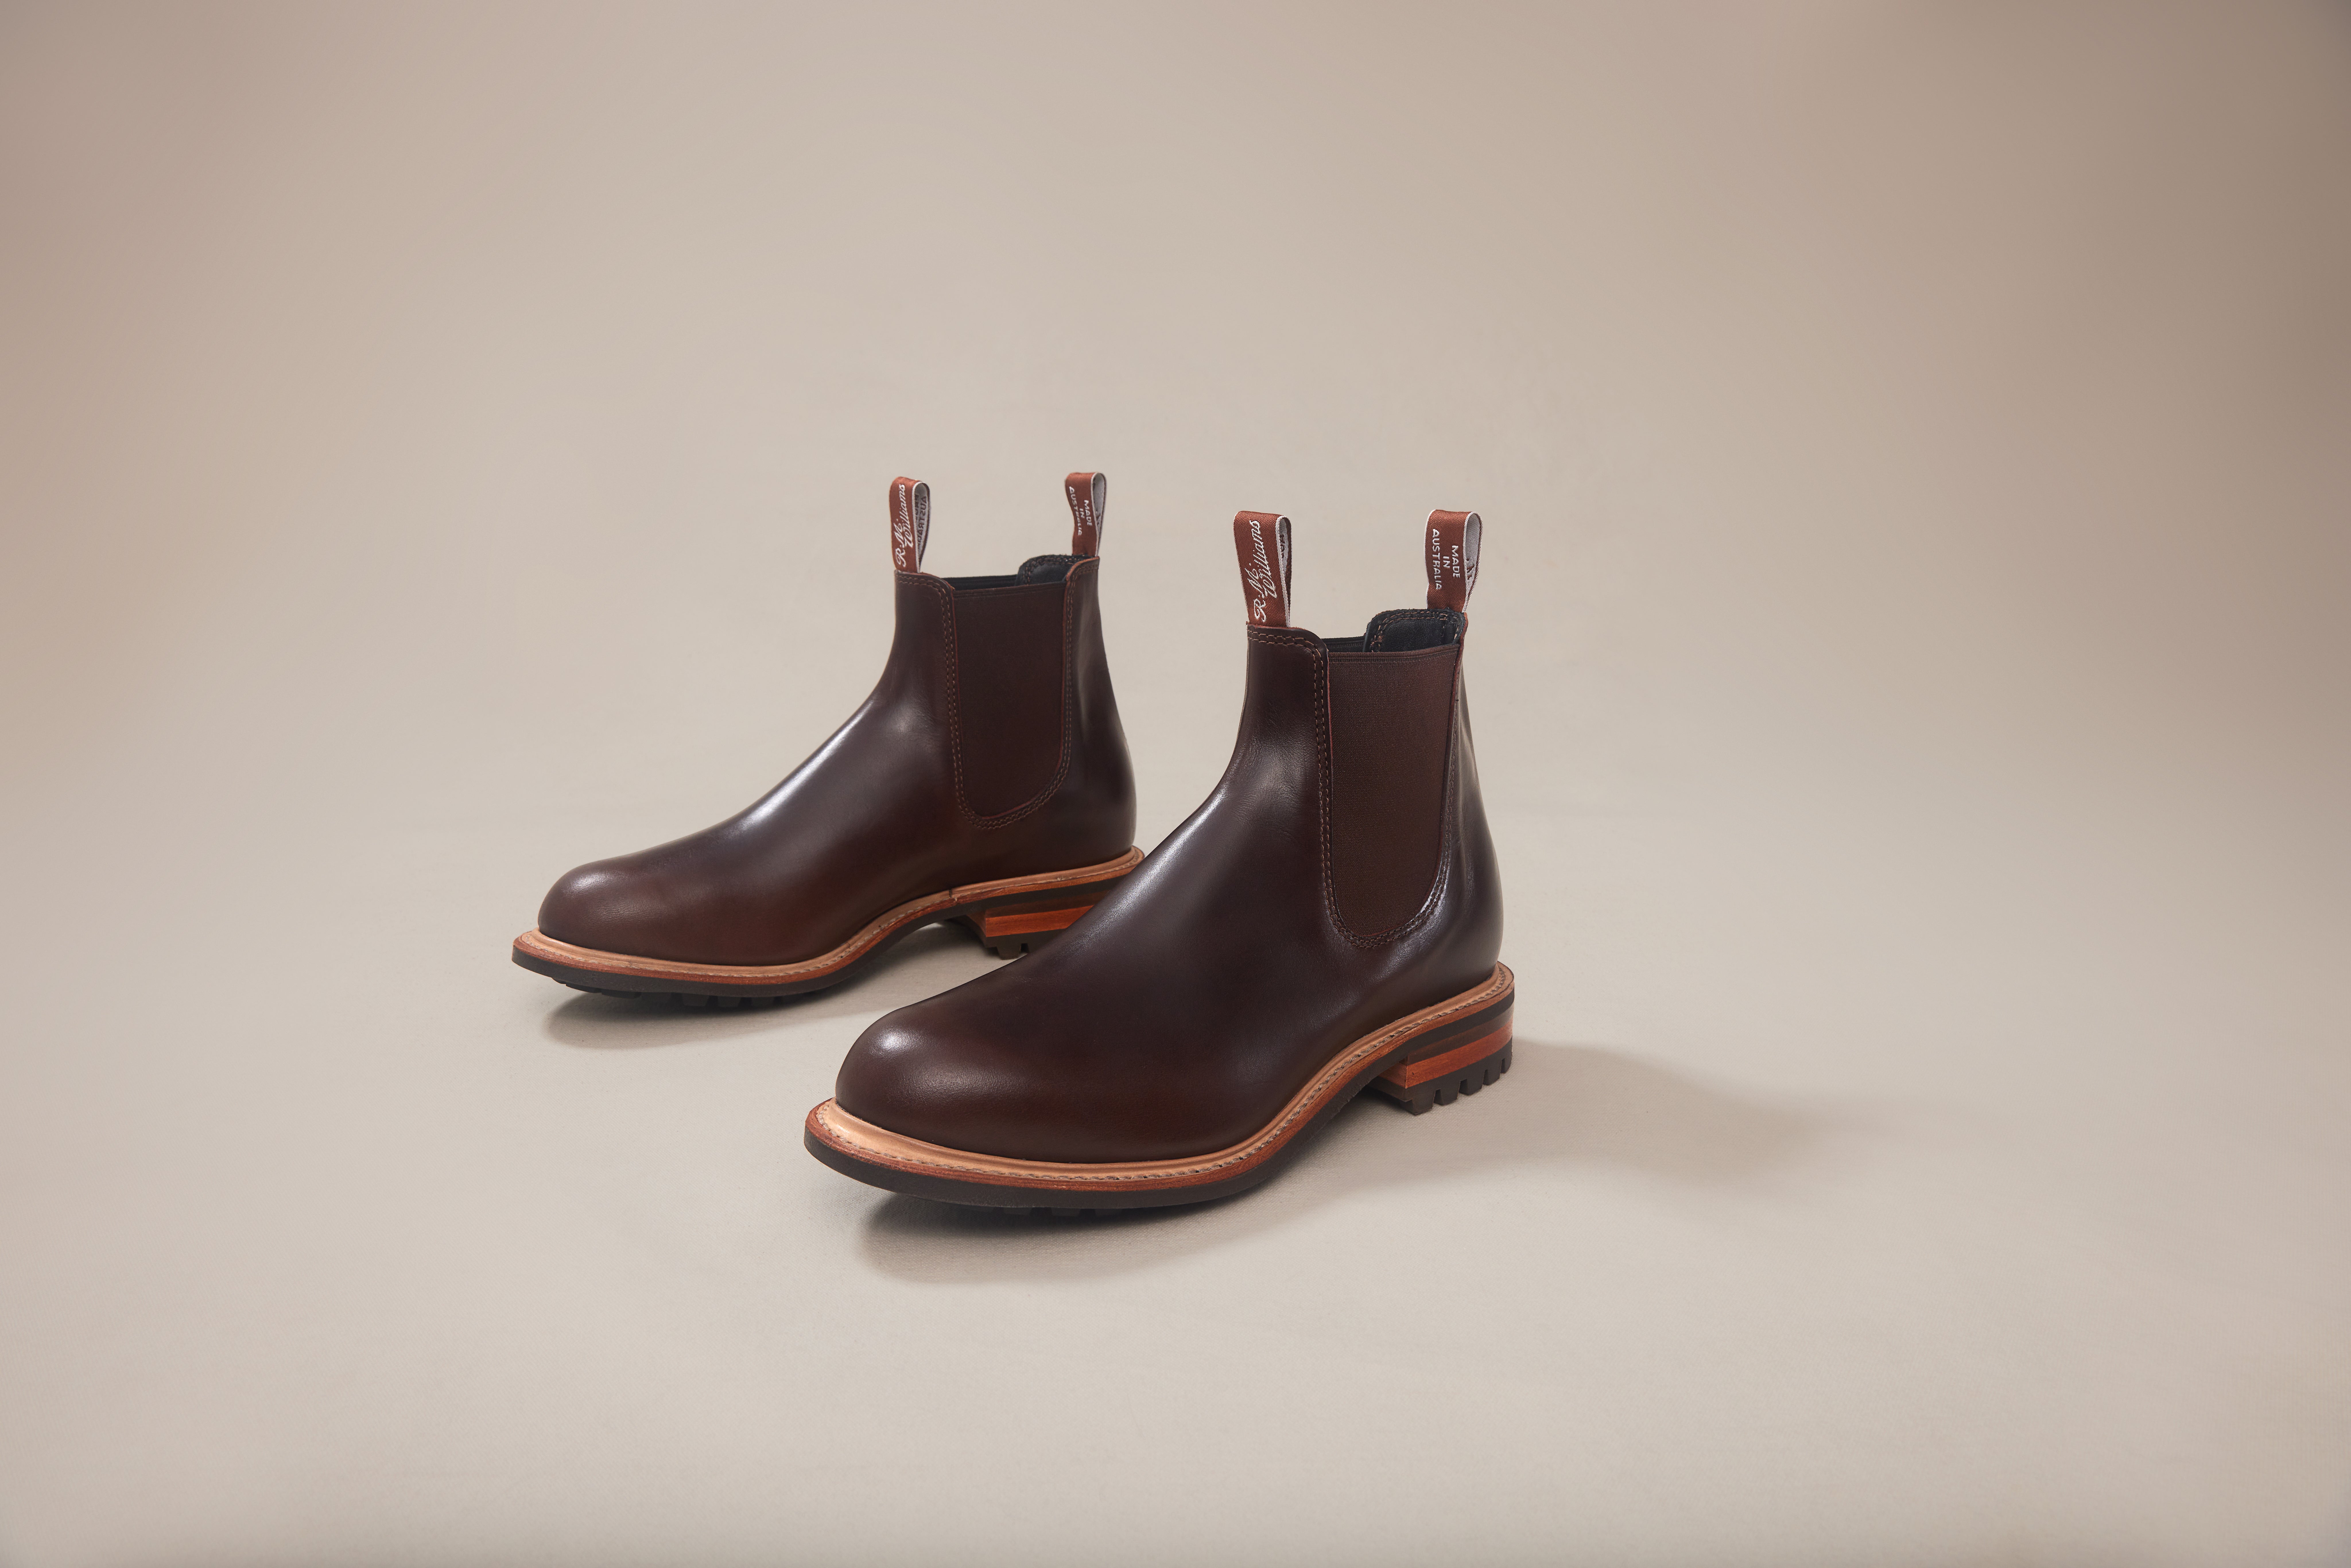 The Most Popular Boots in the World - RM Williams Comfort